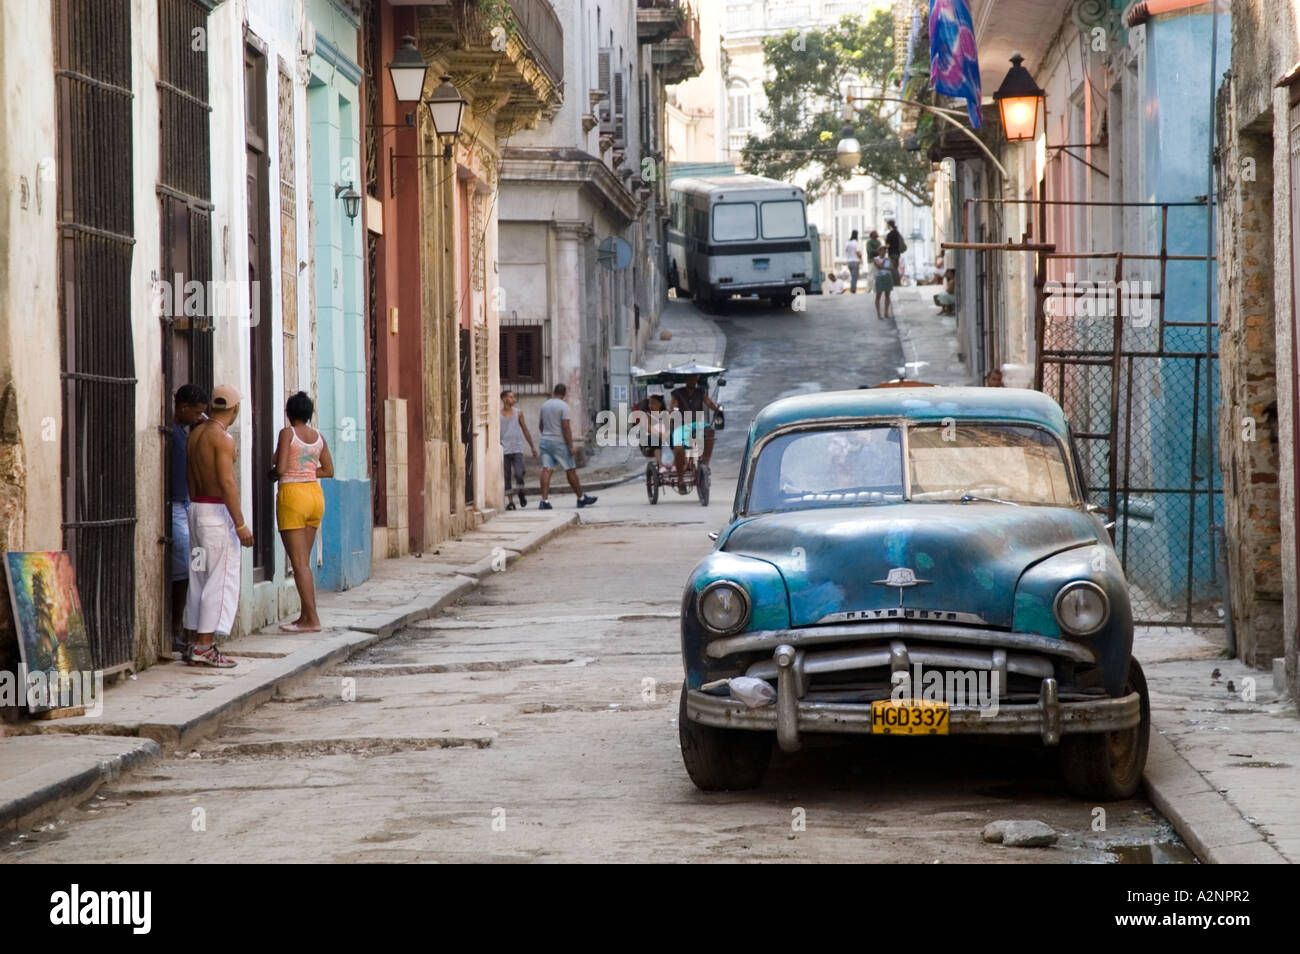 Classic American 1950s Plymouth car parked in the street, Havana Cuba Stock Photo